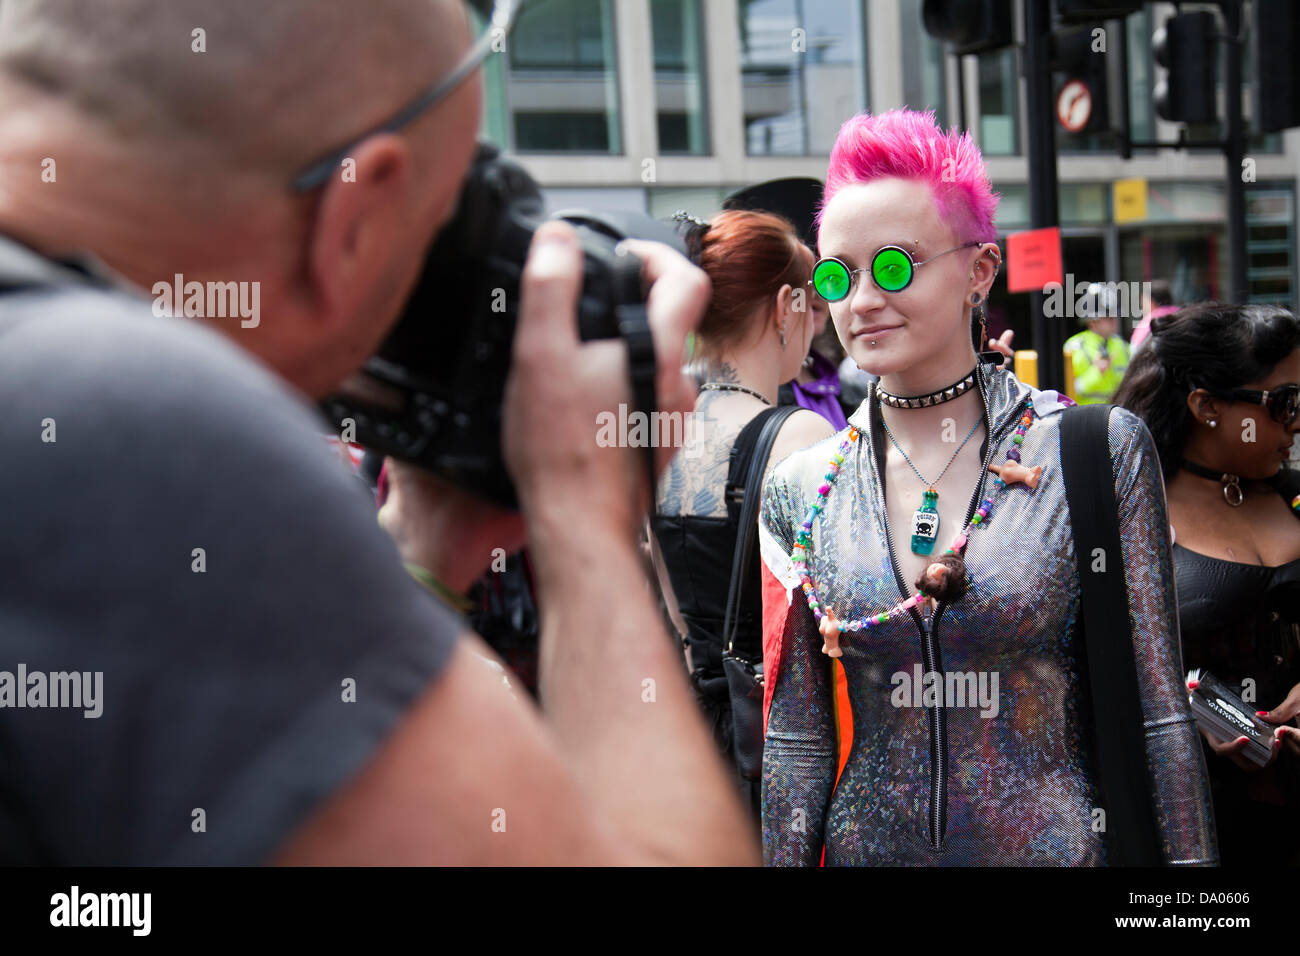 London, UK. 29th June 2013. London Gay Pride - Participant on the march getting a photo taken Credit:  Miguel Sobreira/Alamy Live News Stock Photo